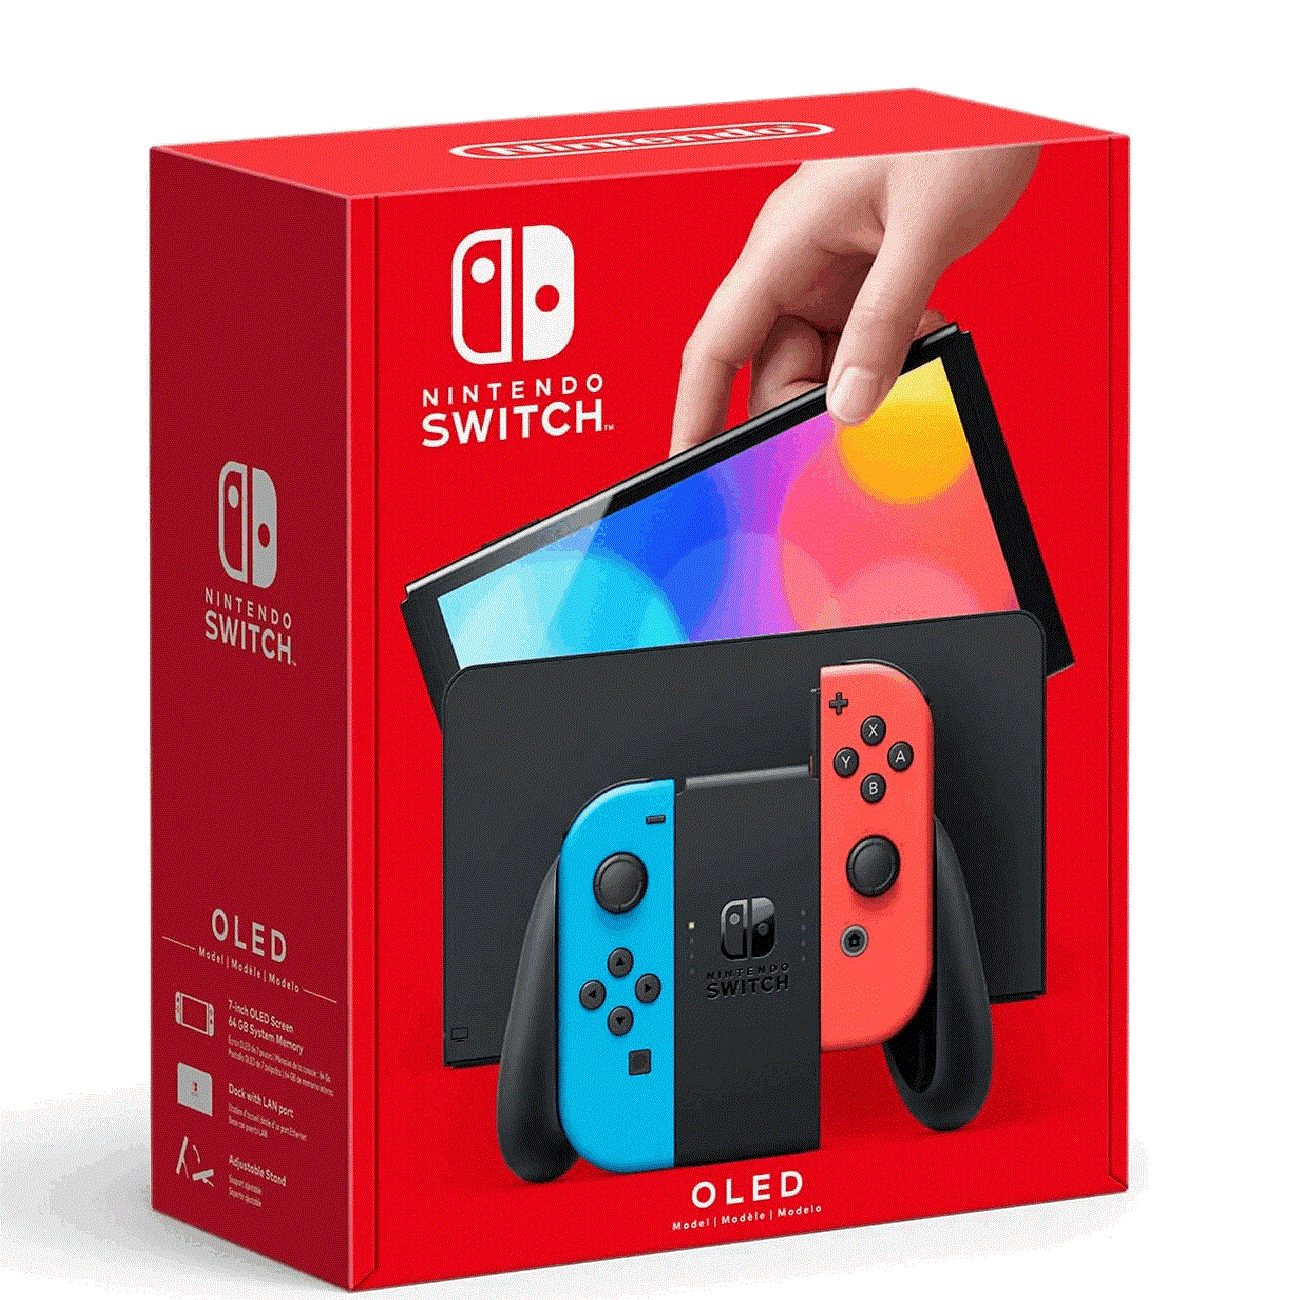 Nintendo Switch OLED Model Red/Blue Console.